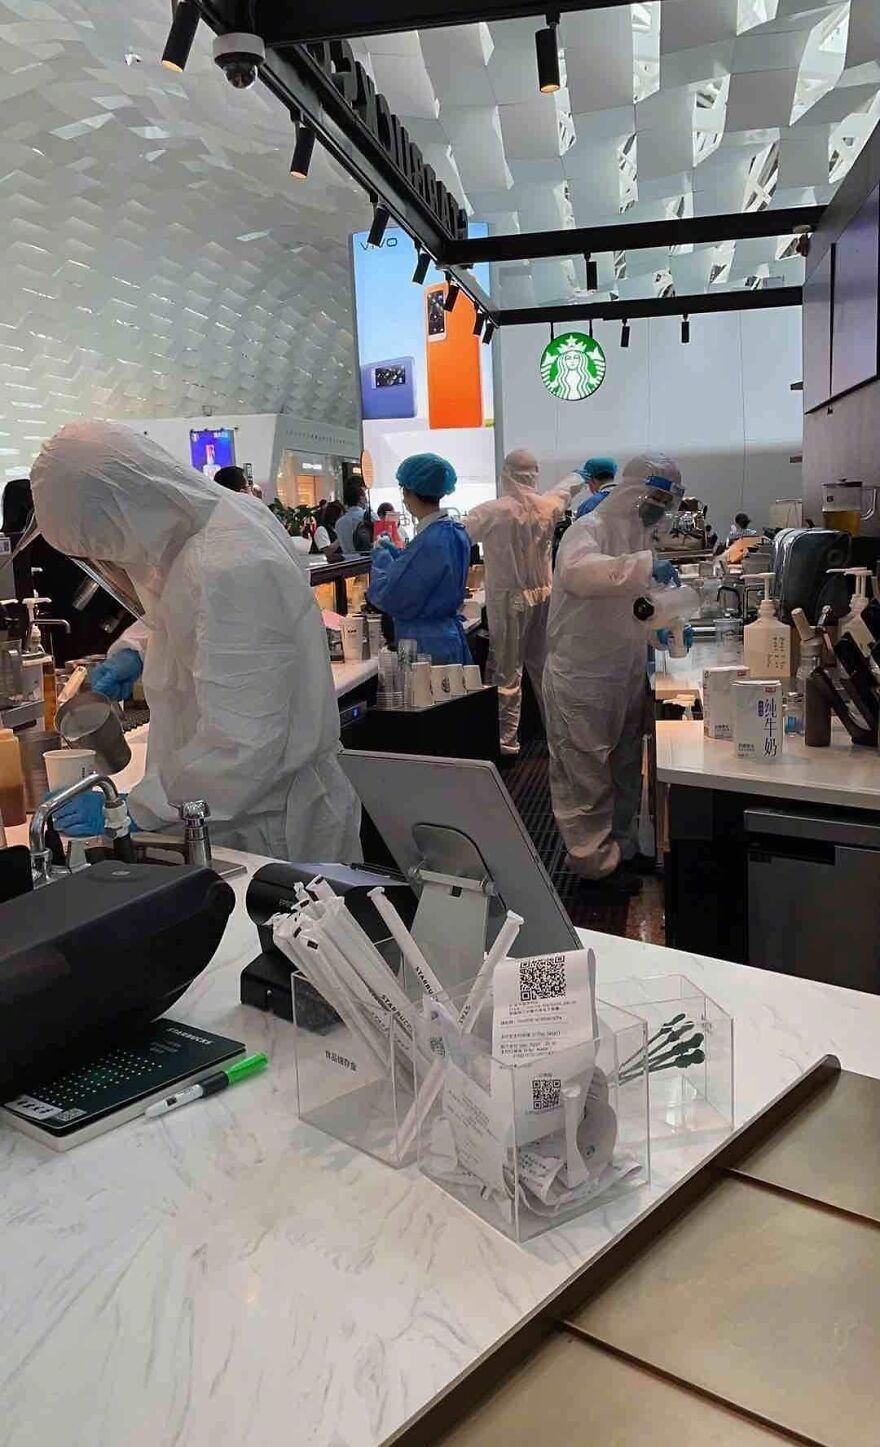 Starbucks At The Shenzhen Airport Looking Like A Lab